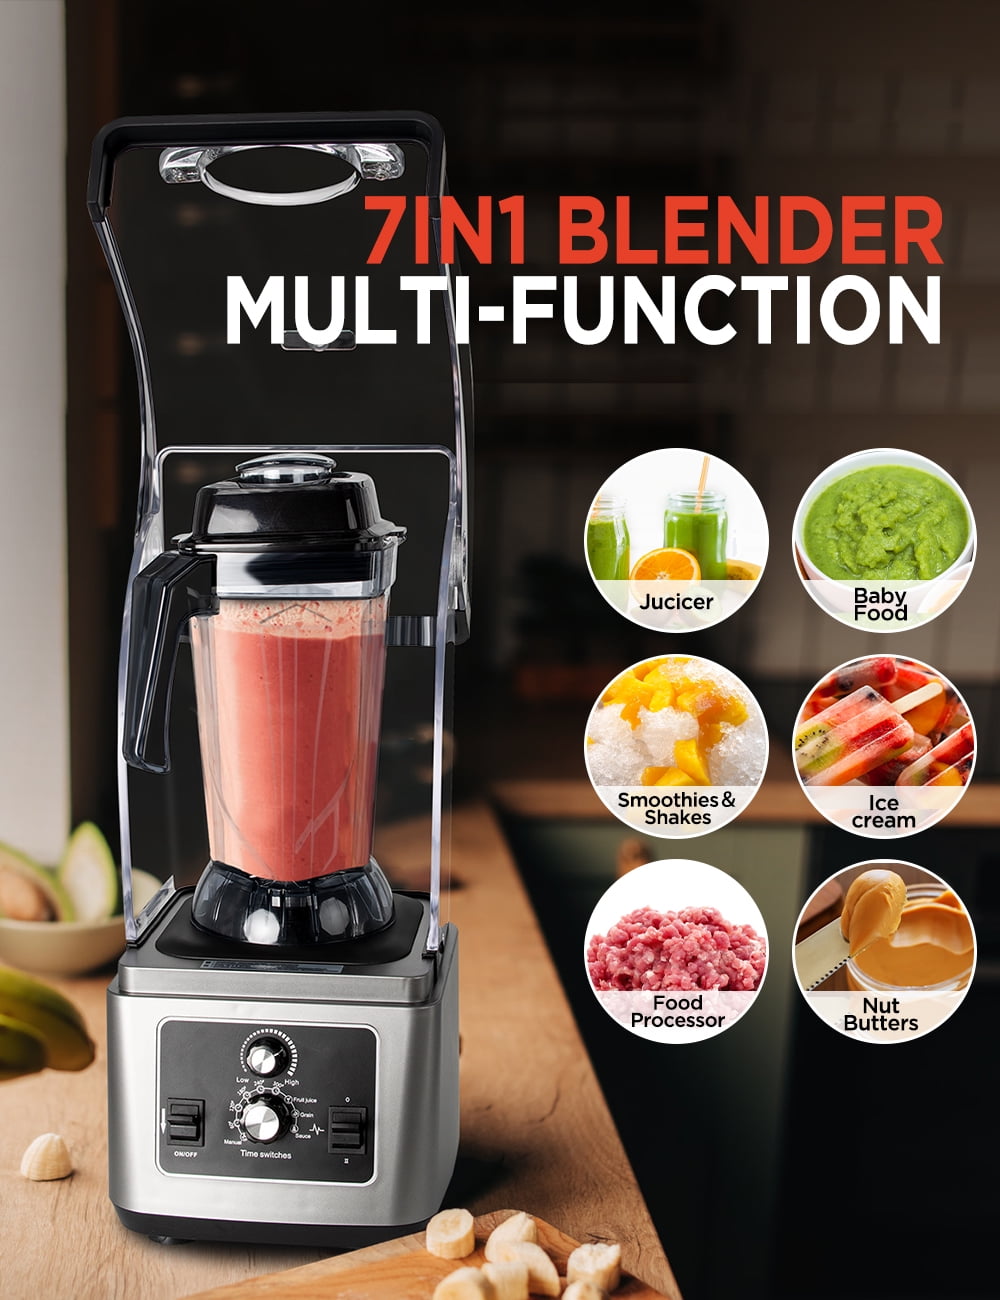 EEPHO 1500W Smoothie Maker High Power Blender with 10 Speeds